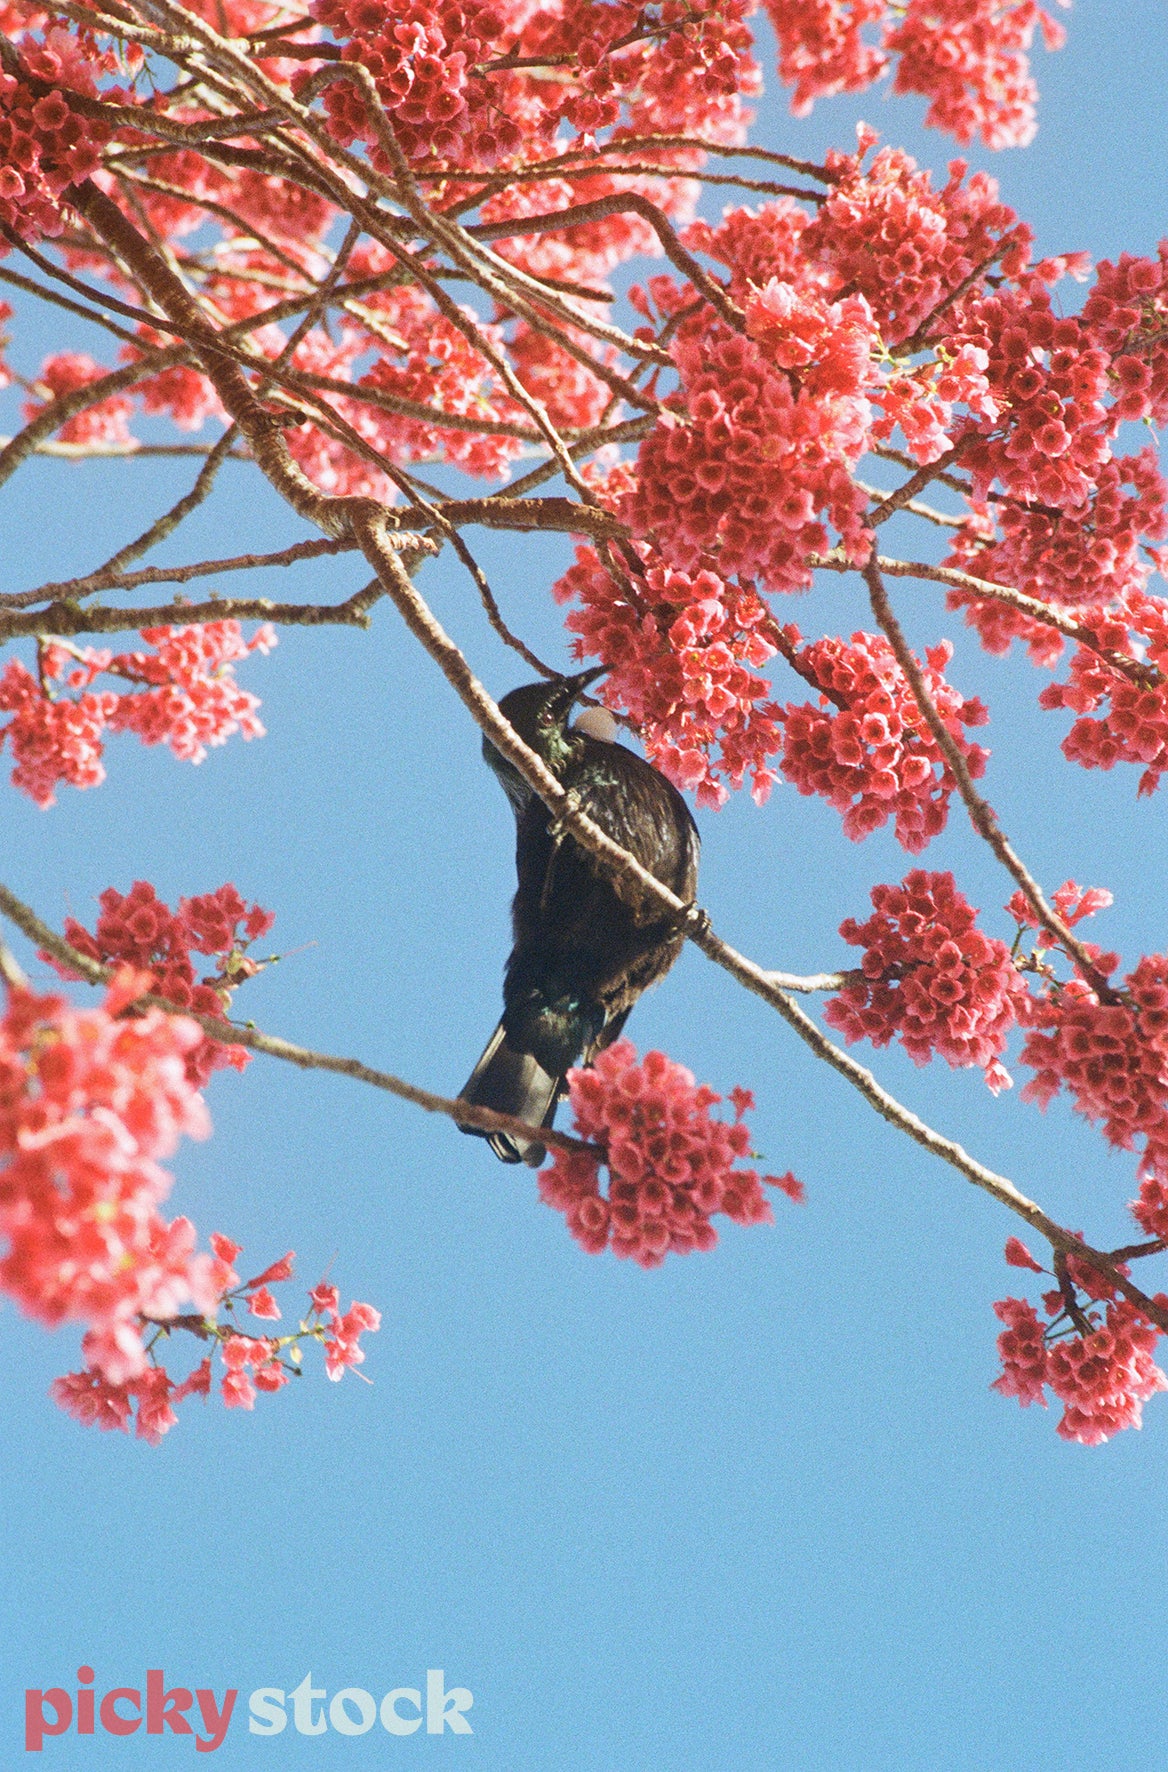 Bird sitting in cherry blossom tree. Epic bright contrast of the cherry blossom and the blue sky. No clouds visible.